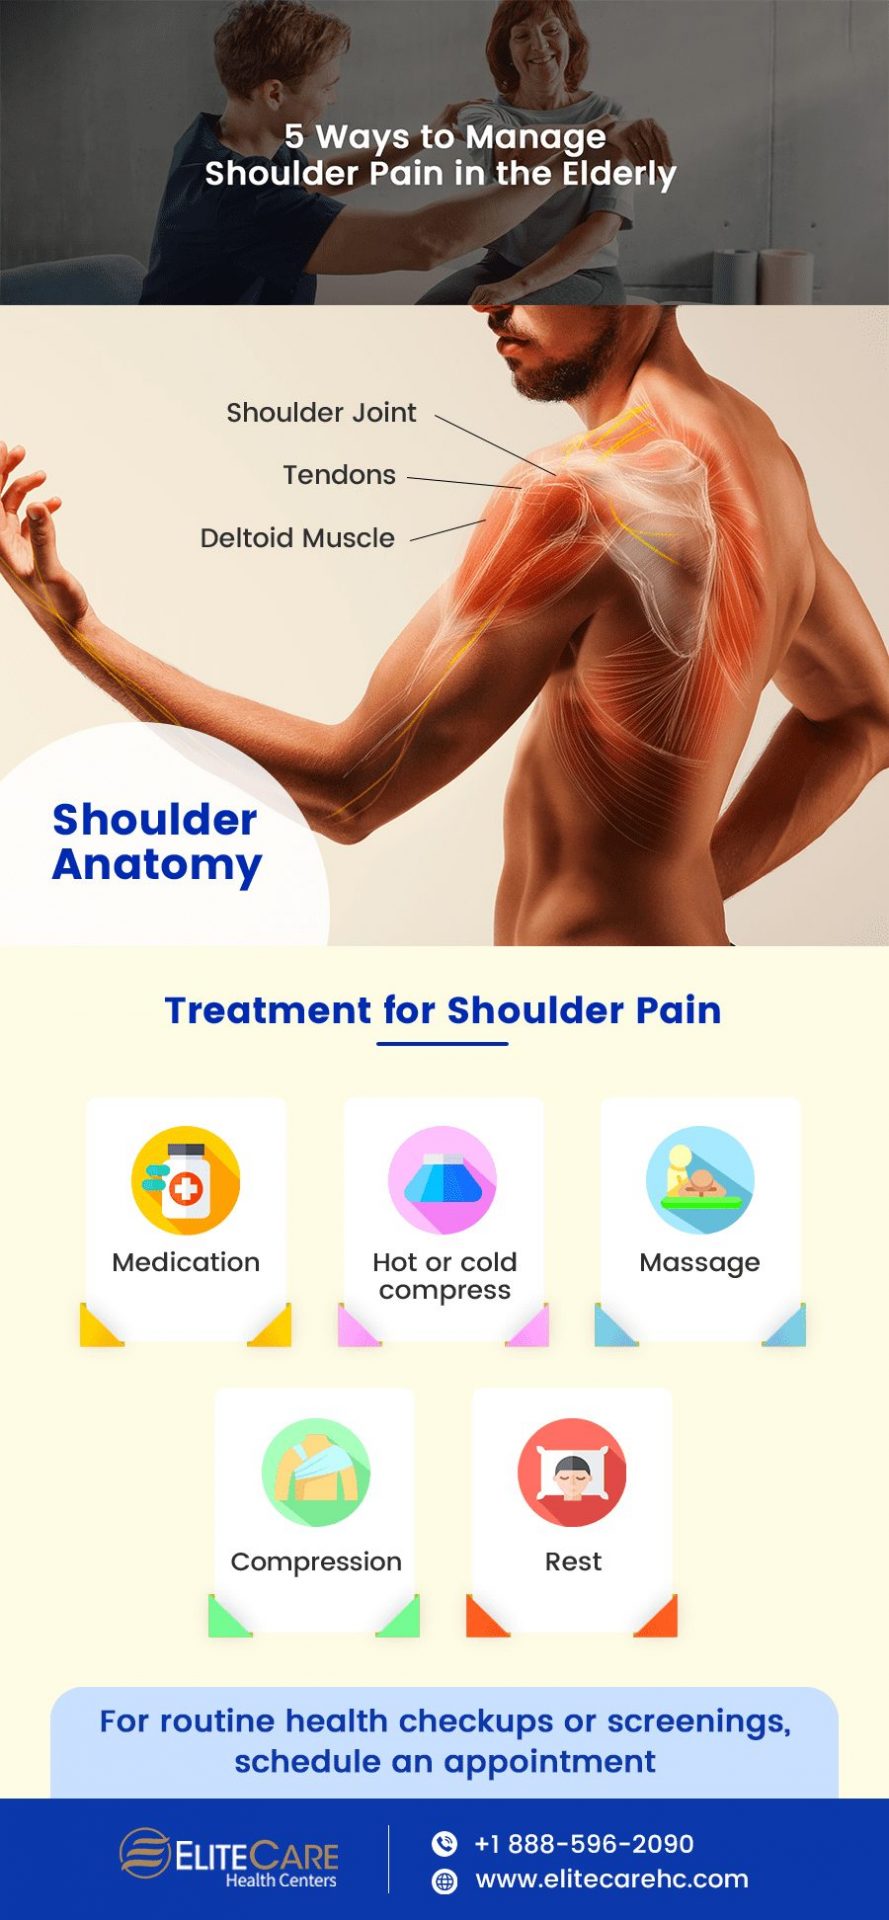 5 Ways to Manage Shoulder Pain in the Elderly | Infographic